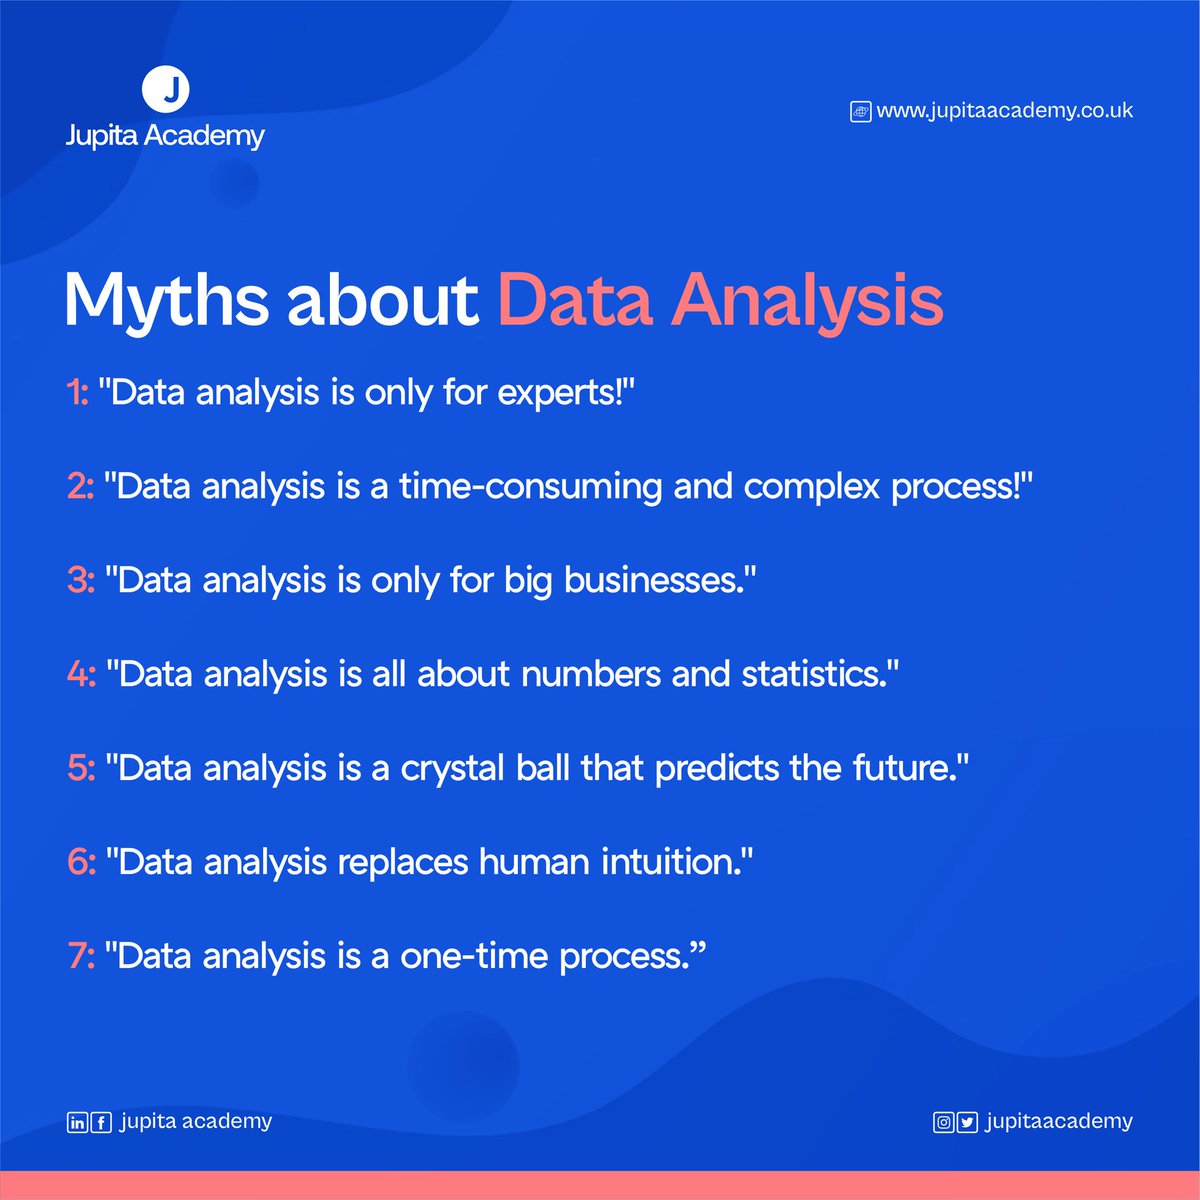 Happy Tuesday Folks😎

Let's dive into the world of data analysis and bust some common myths that may be holding you back from unleashing the full potential of this incredible field.✨

#jupitaacademy #data #datascience 
#DataAnalytics #TechisHiring #myths